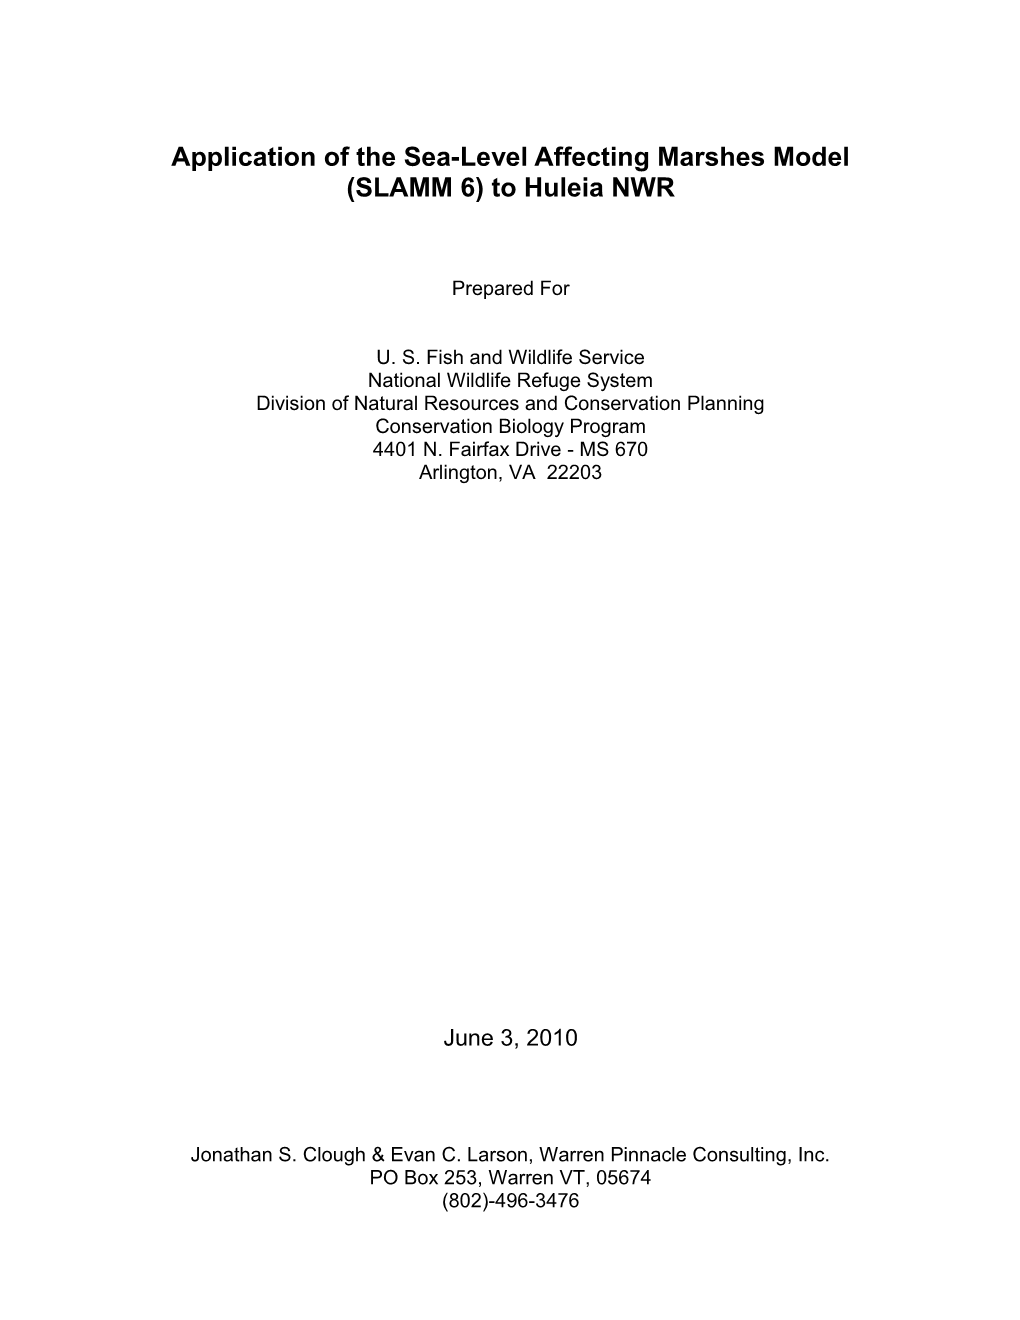 Application of the Sea-Level Affecting Marshes Model (SLAMM 6) to Huleia NWR